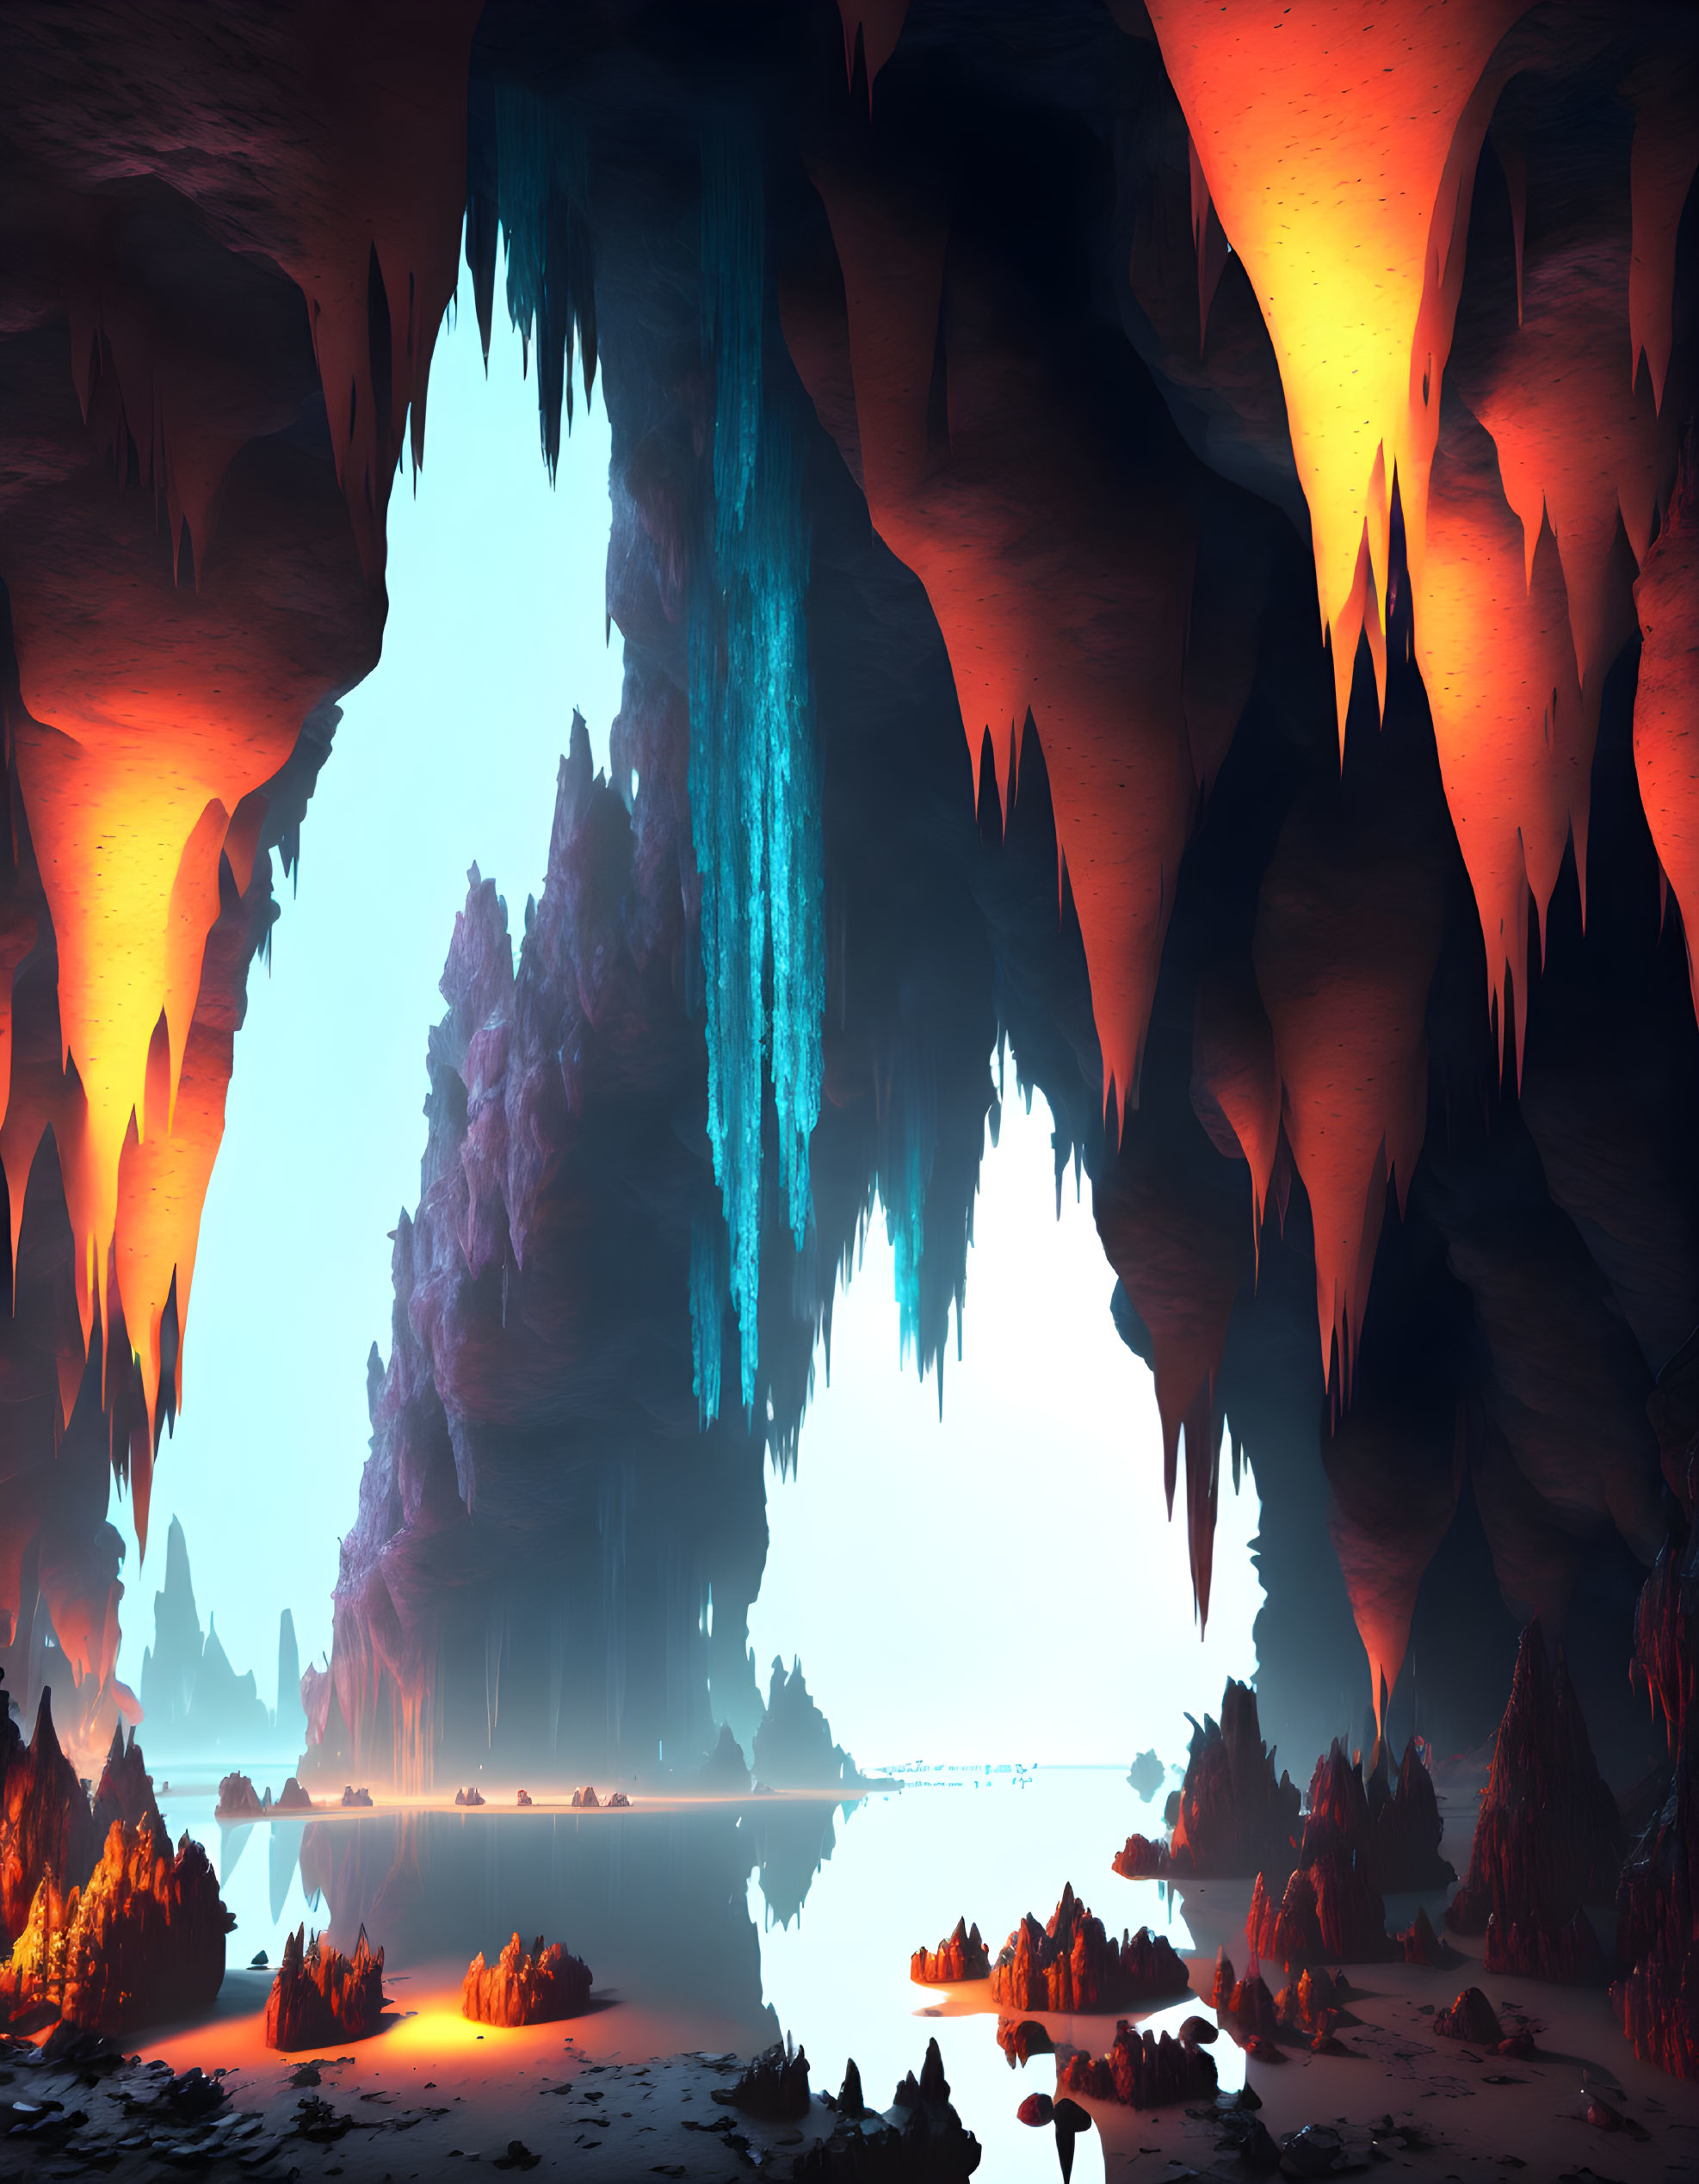 Ethereal cave with orange stalactites and blue waterfall